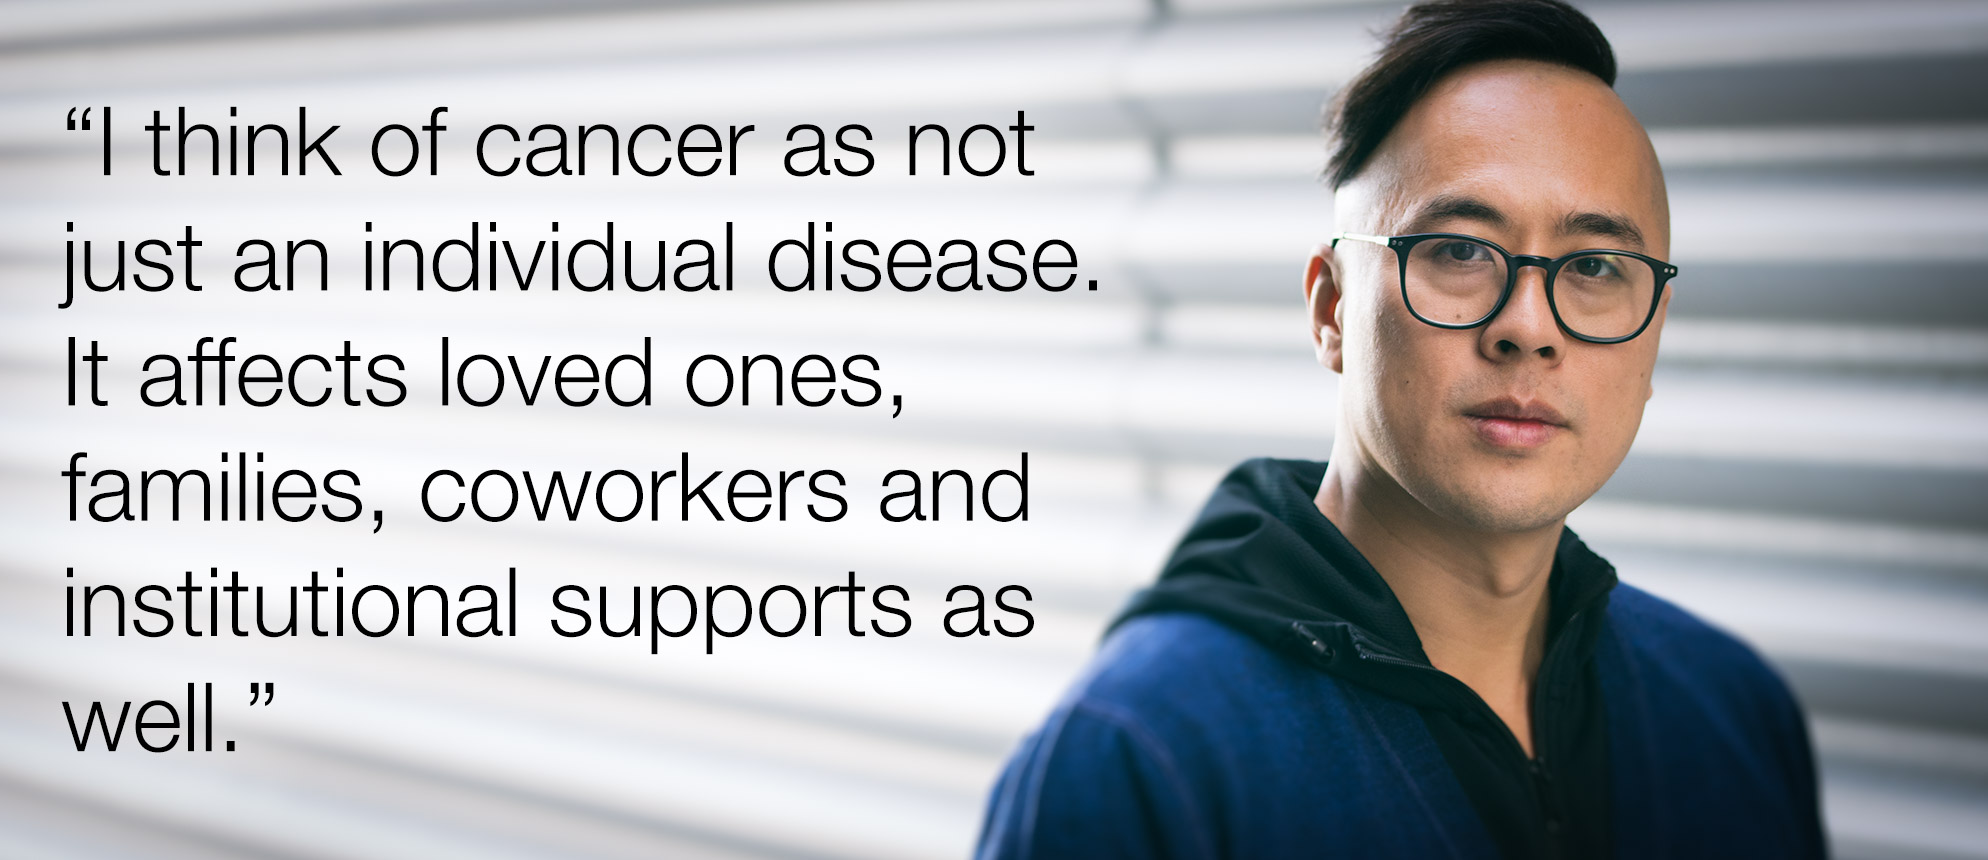 Dr. Chris Lo: "I think of cancer as not just an individual disease,” he says. “It affects loved ones, families, coworkers and institutional supports as well."